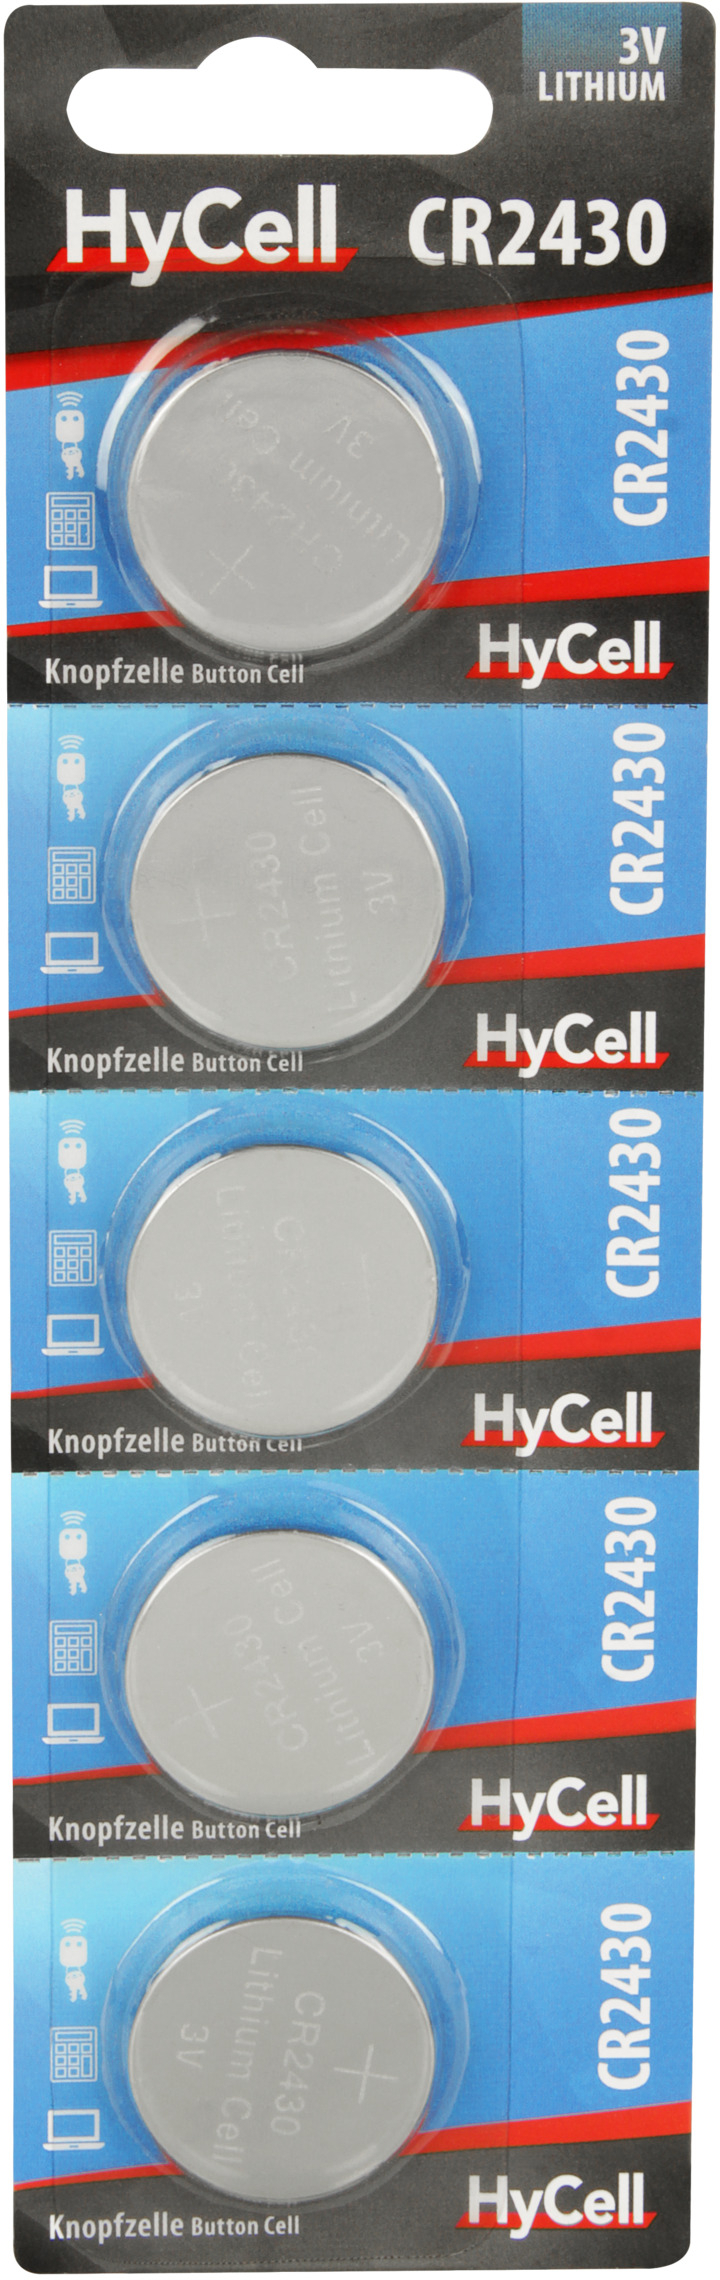 HyCell CR2430 5x